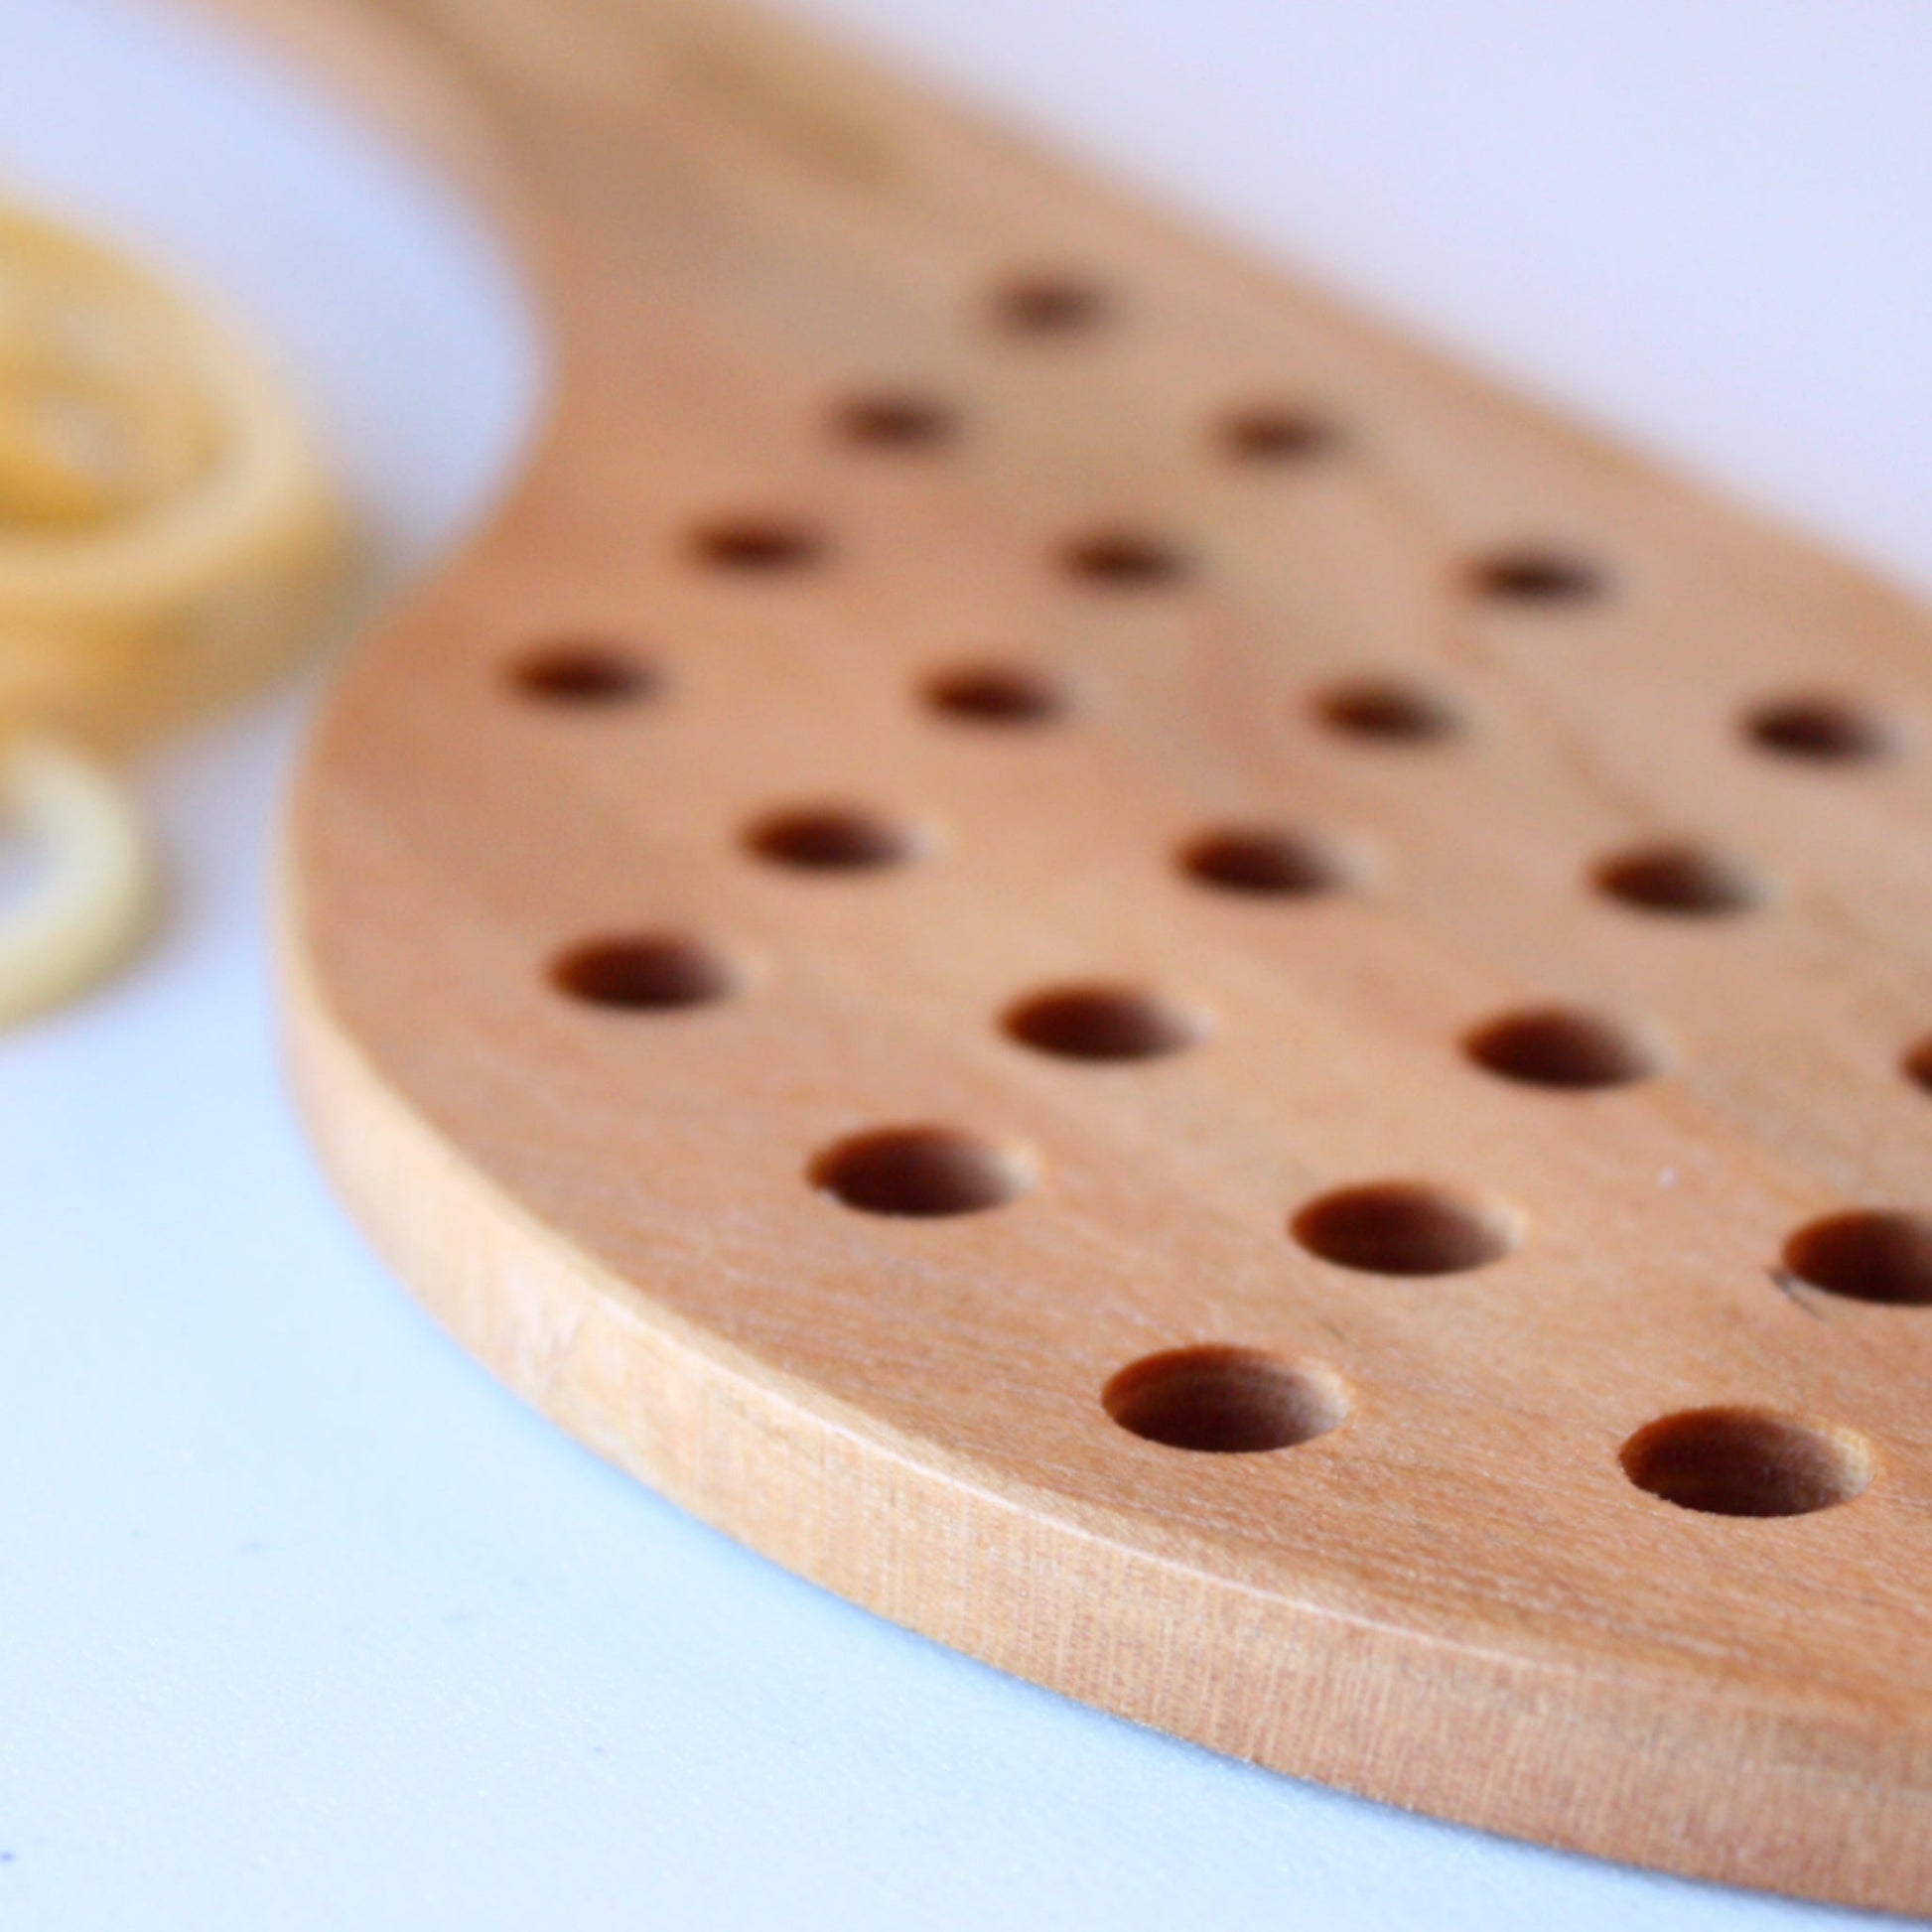 Handmade Wooden Pot Strainer - Made in the USA